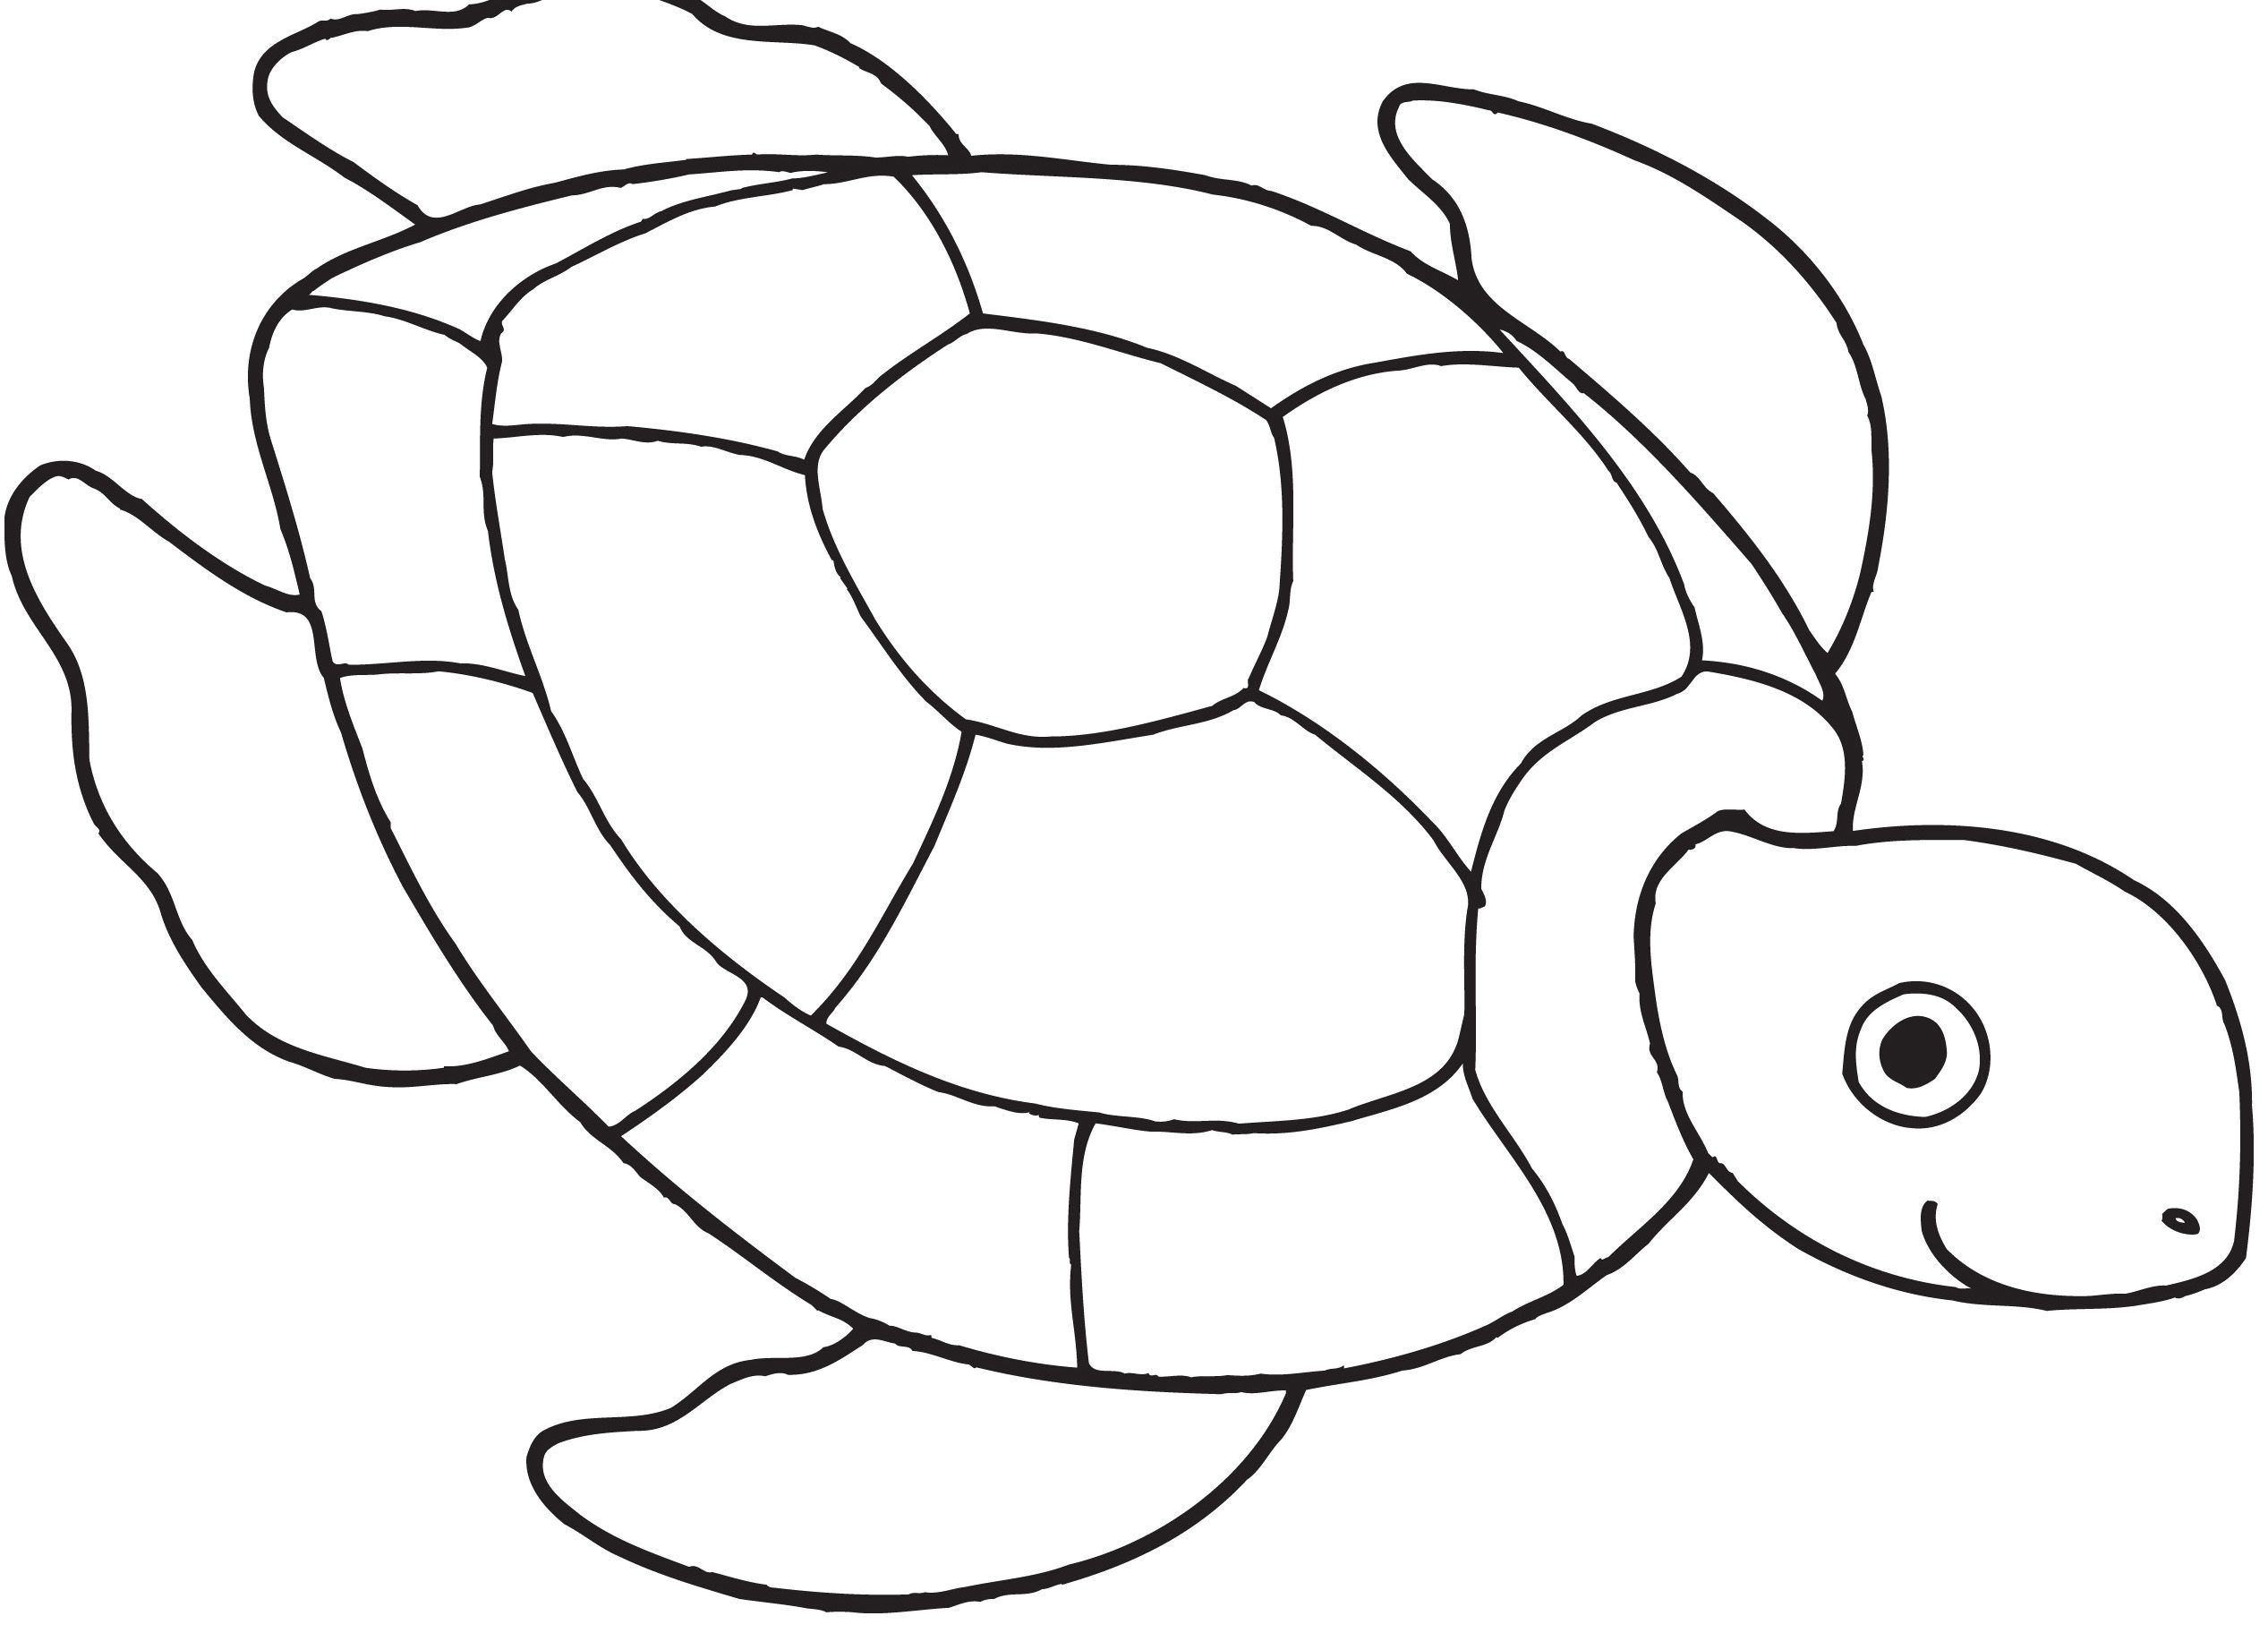 Coloring pages printable free turtle coloring pages